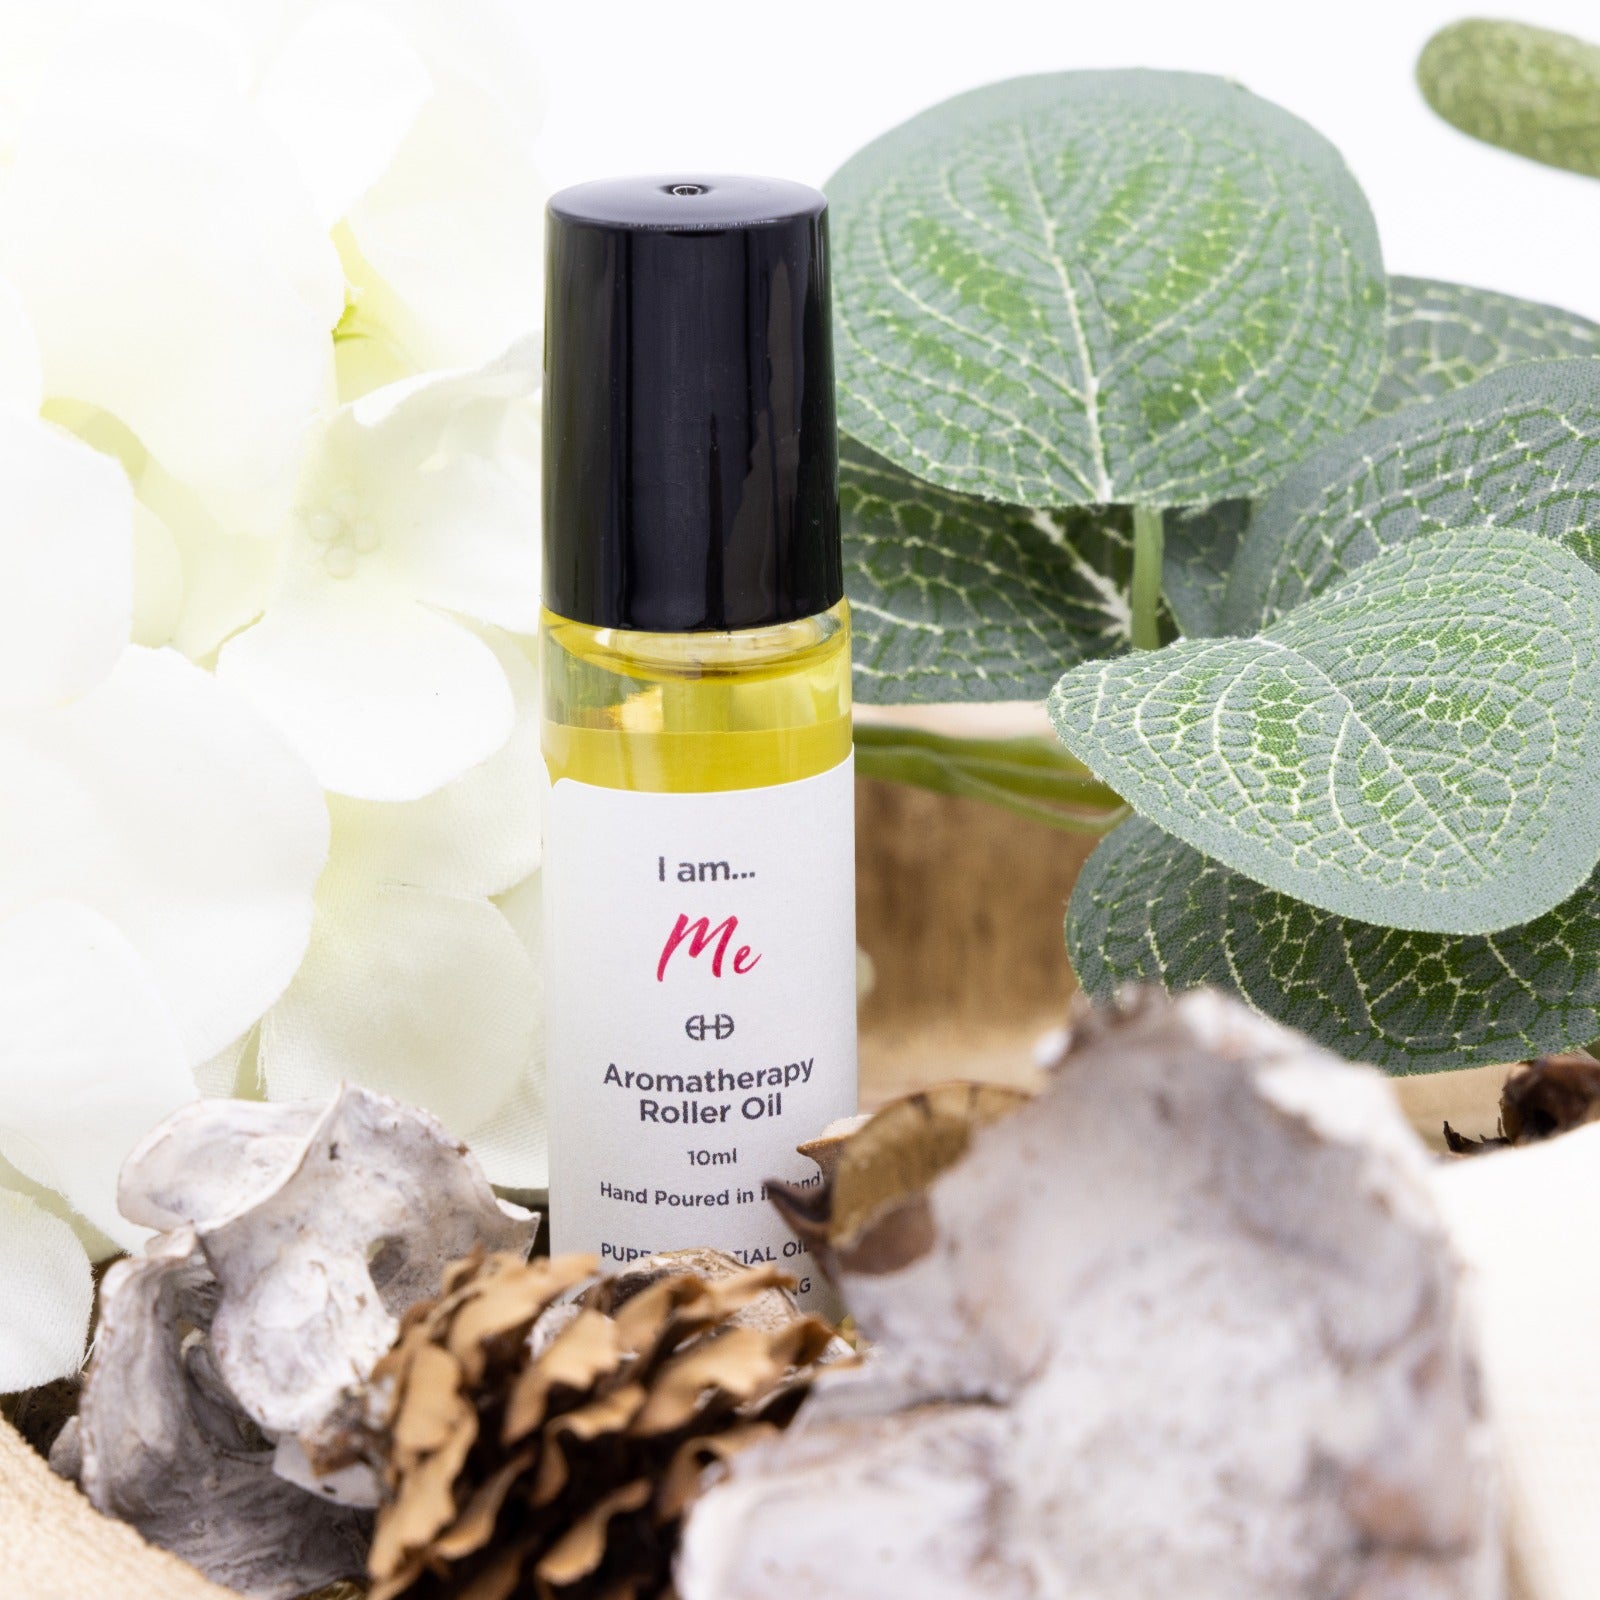 I am... Me Aromatherapy Roller Oil